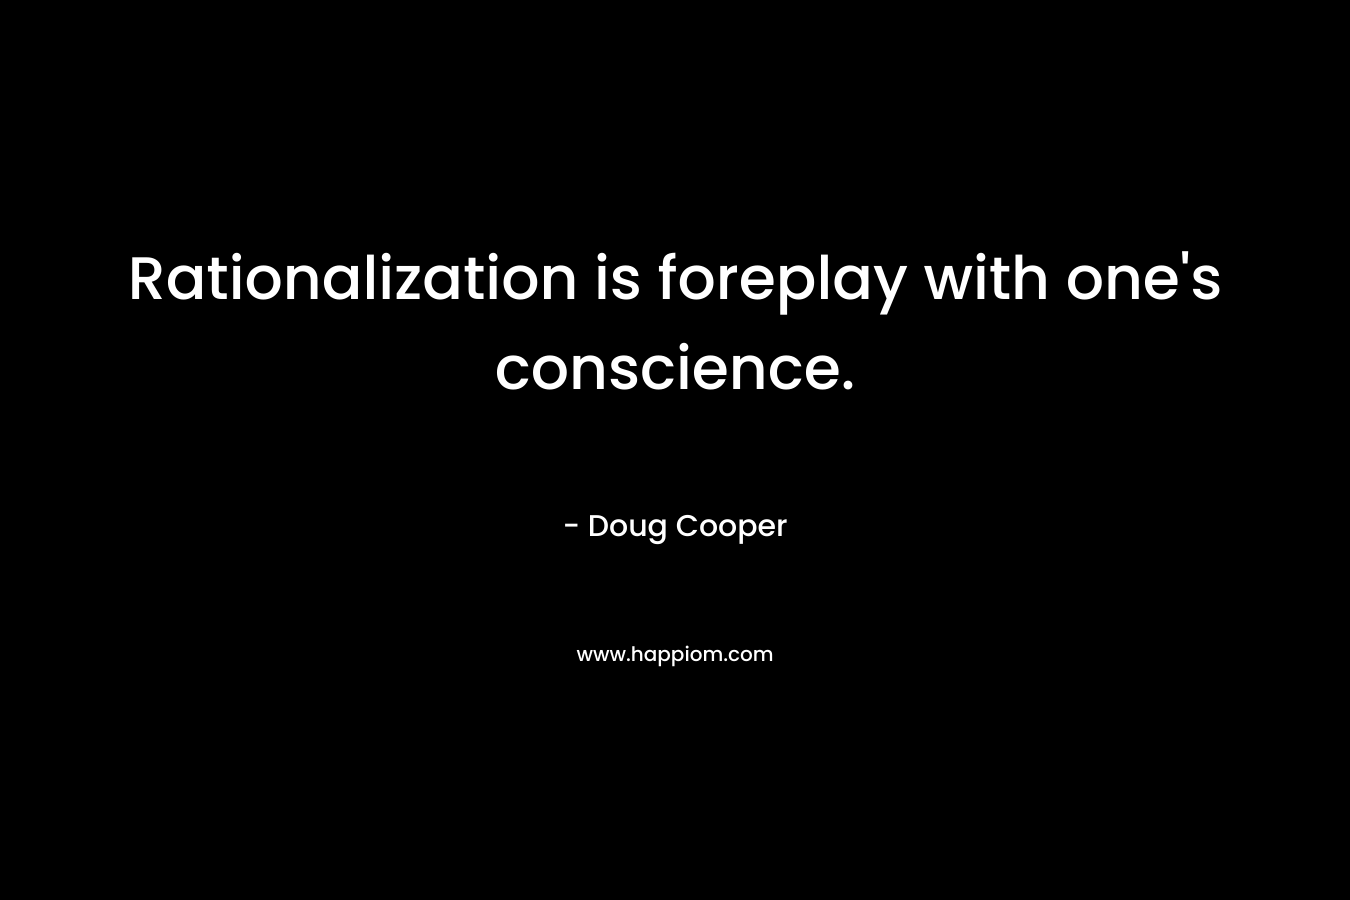 Rationalization is foreplay with one's conscience.